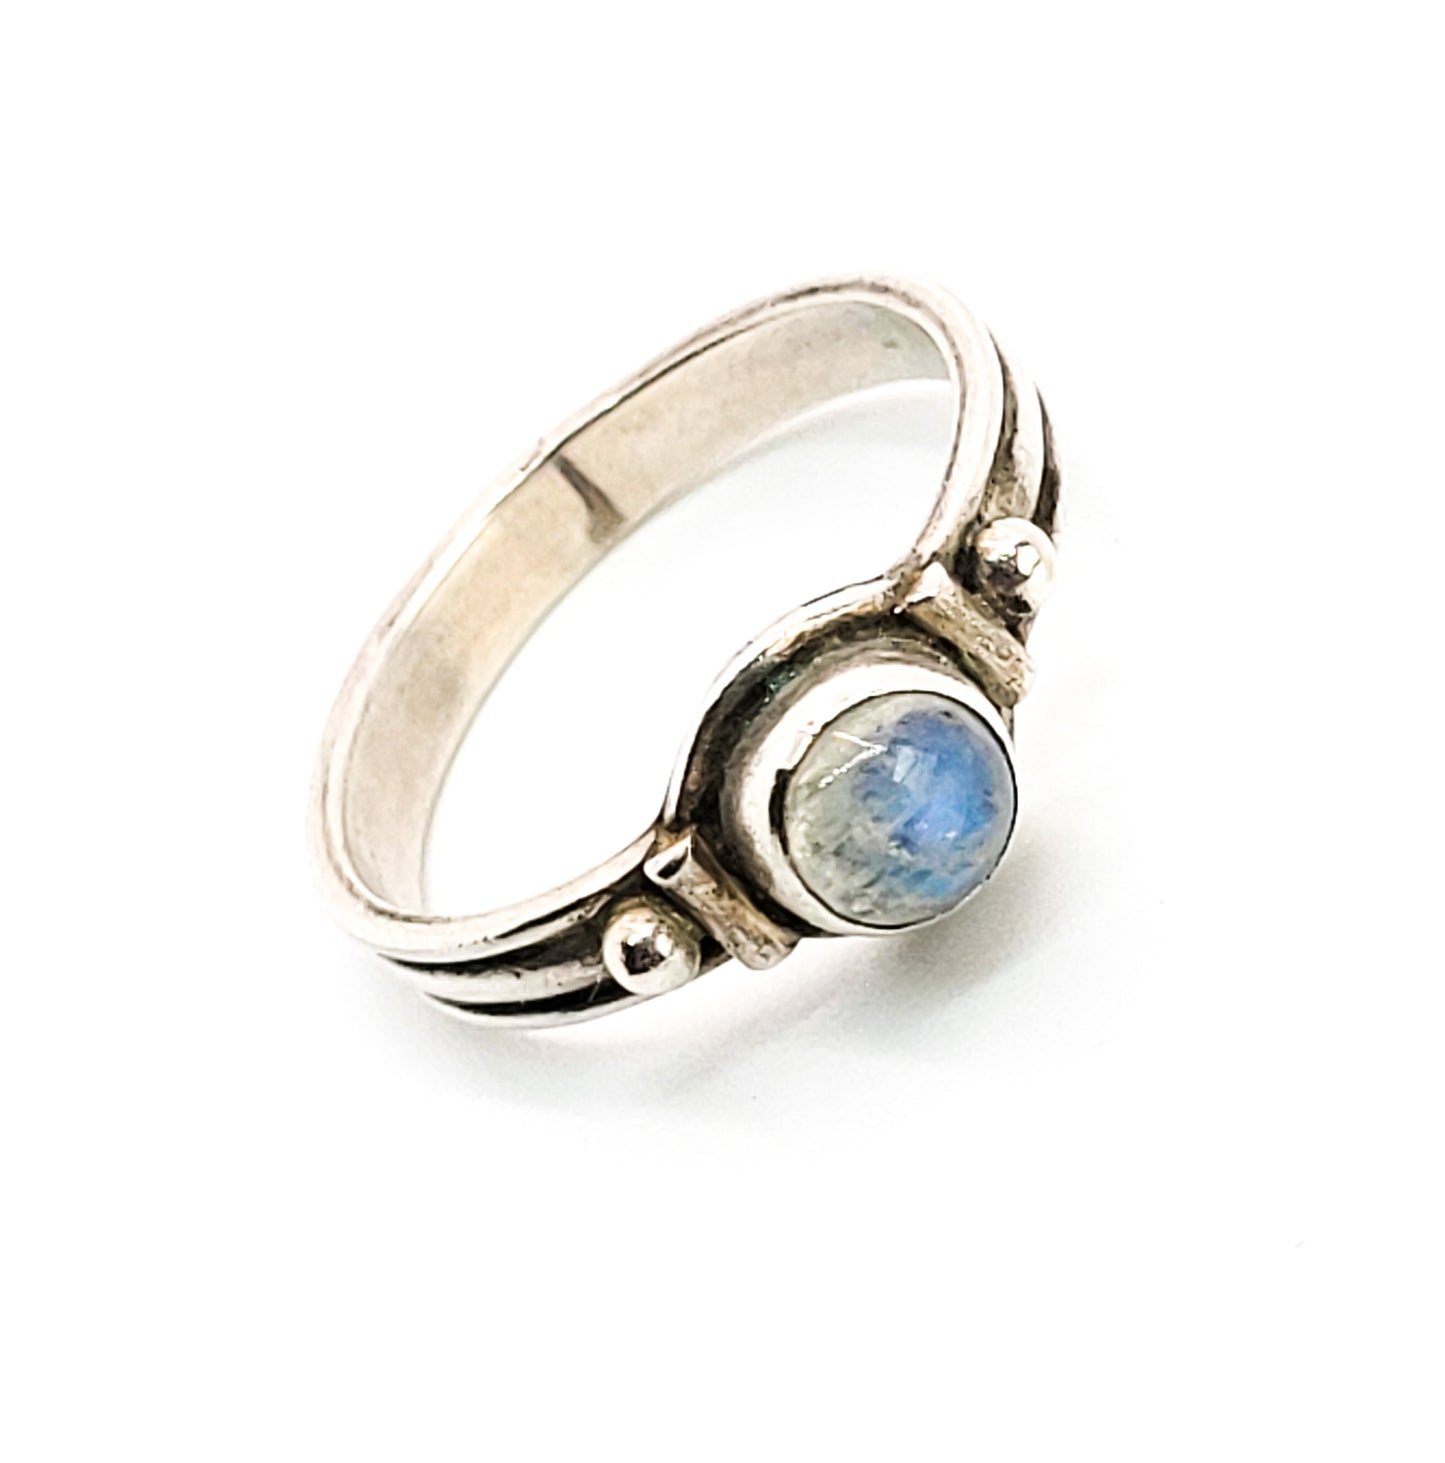 Flashy Blue Moonstone tribal balinese style sterling silver ring size 6